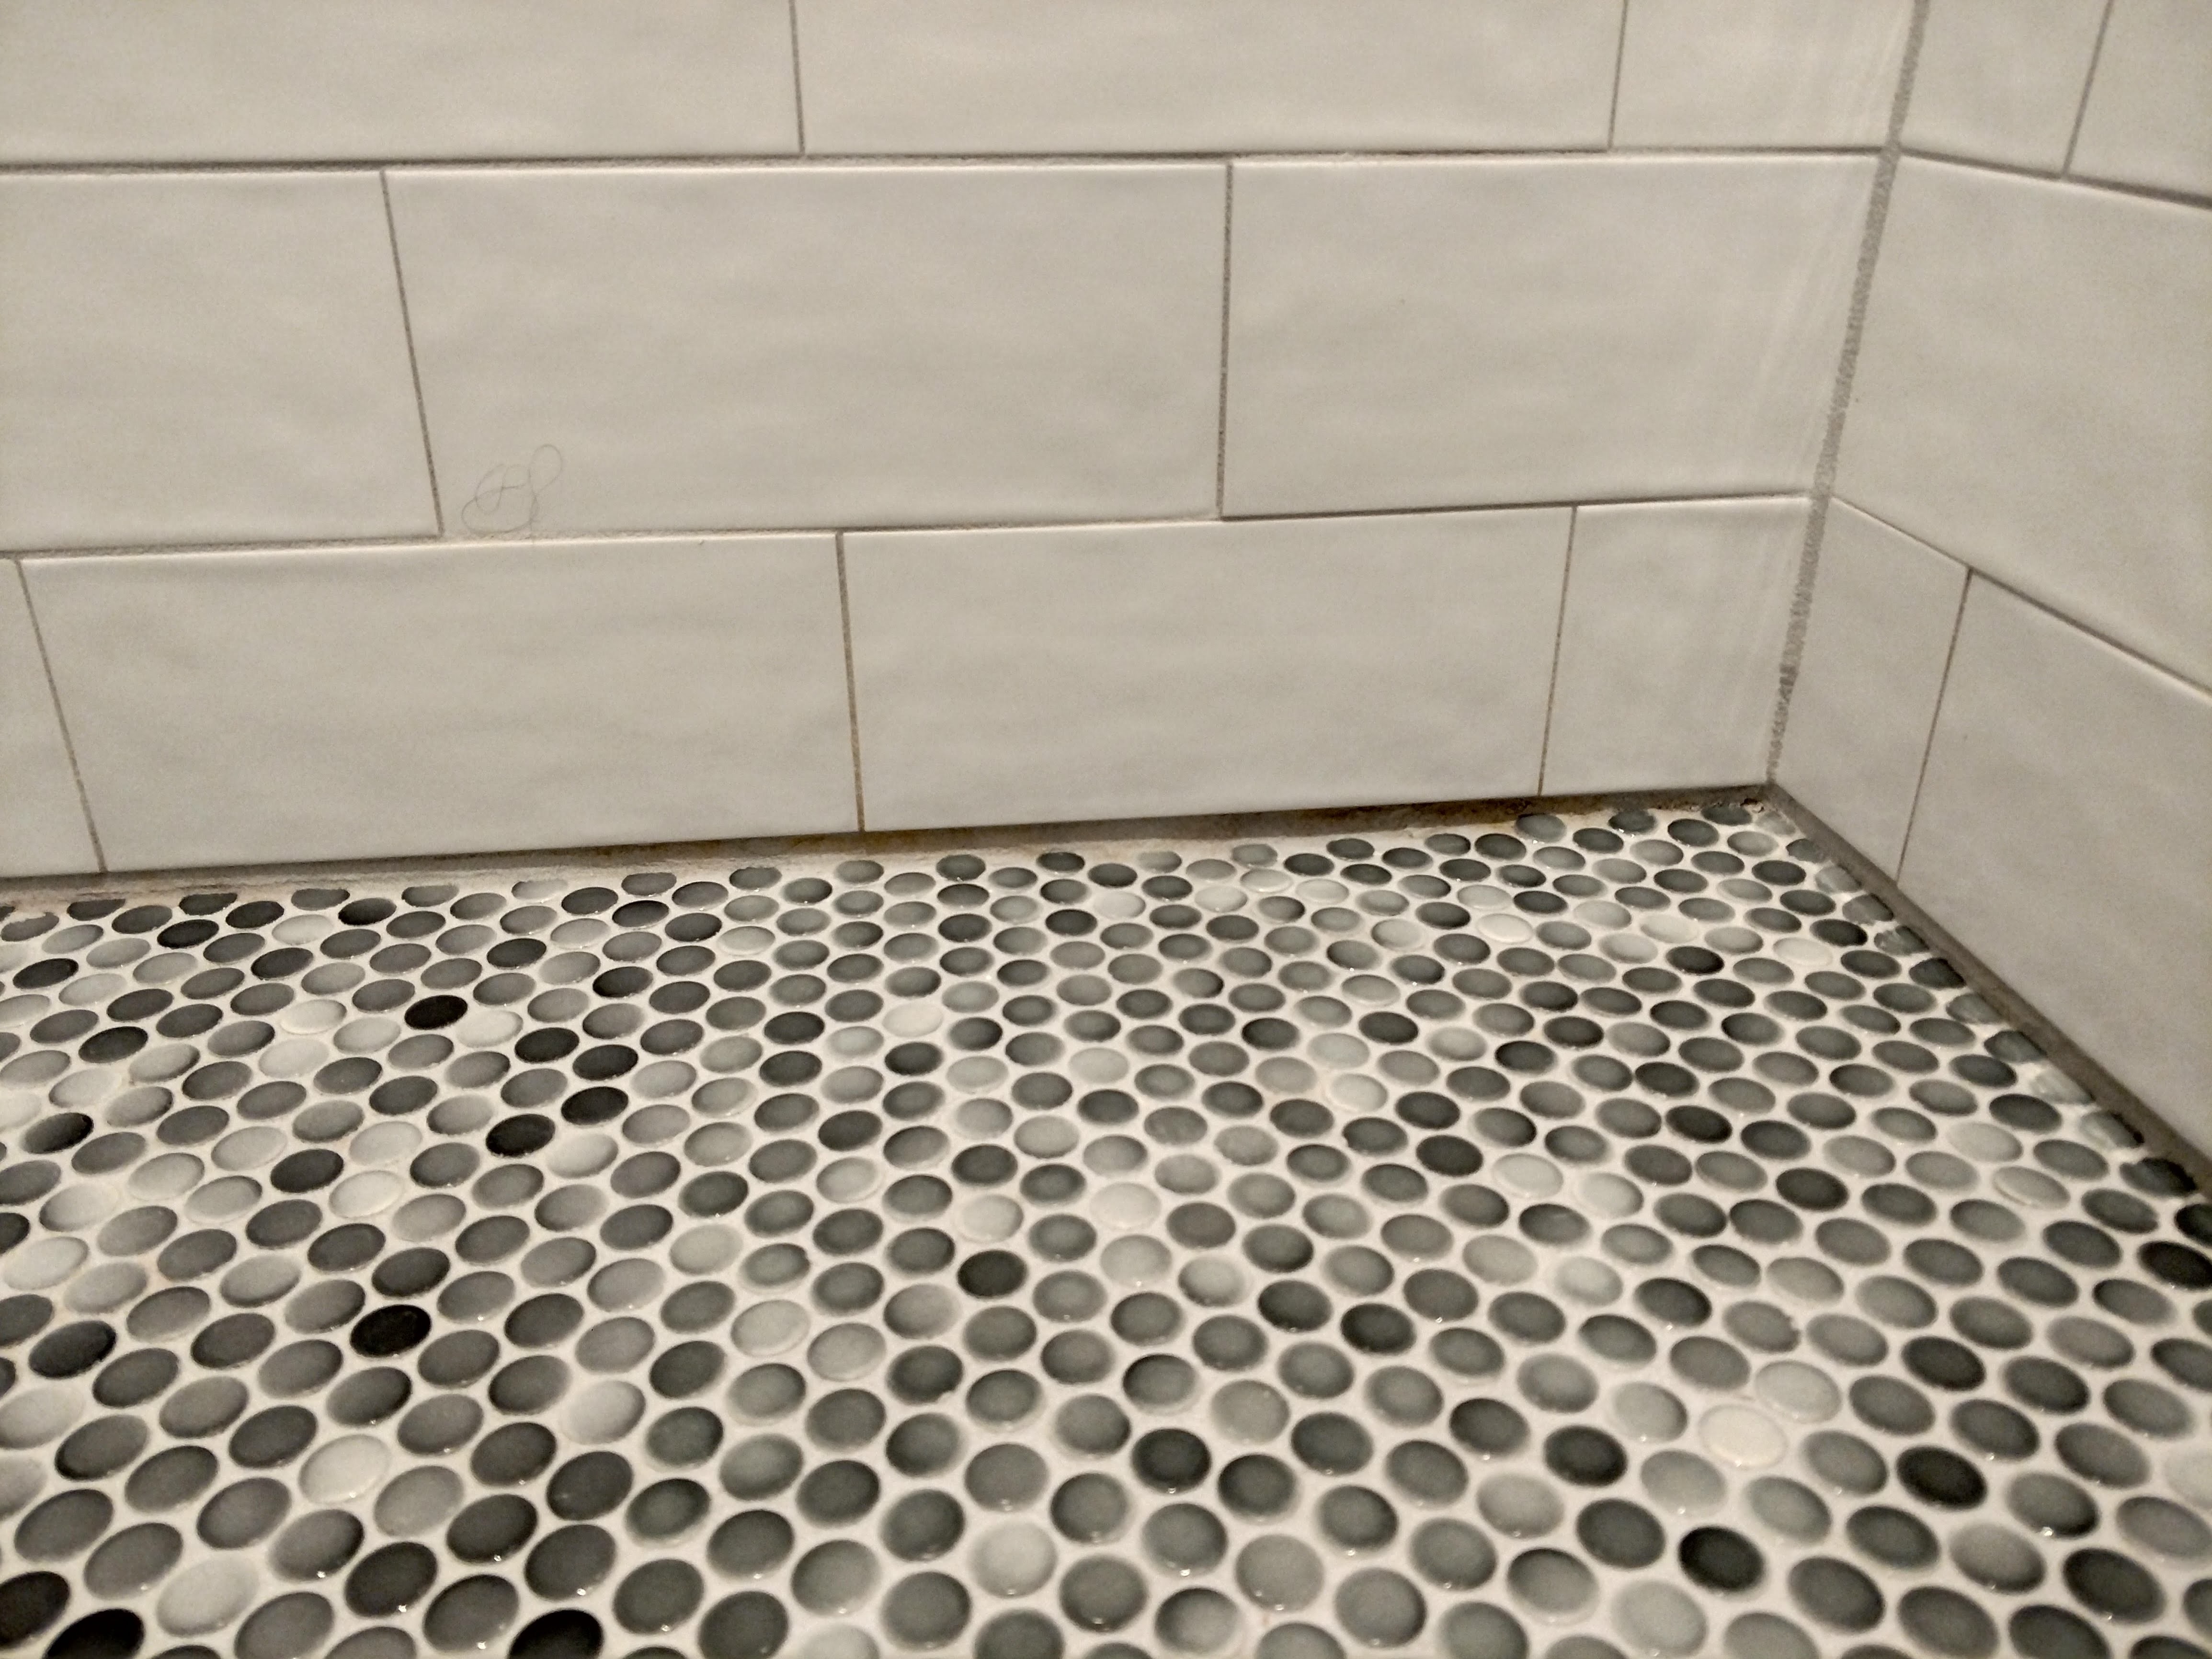 That grout should be white to gray.